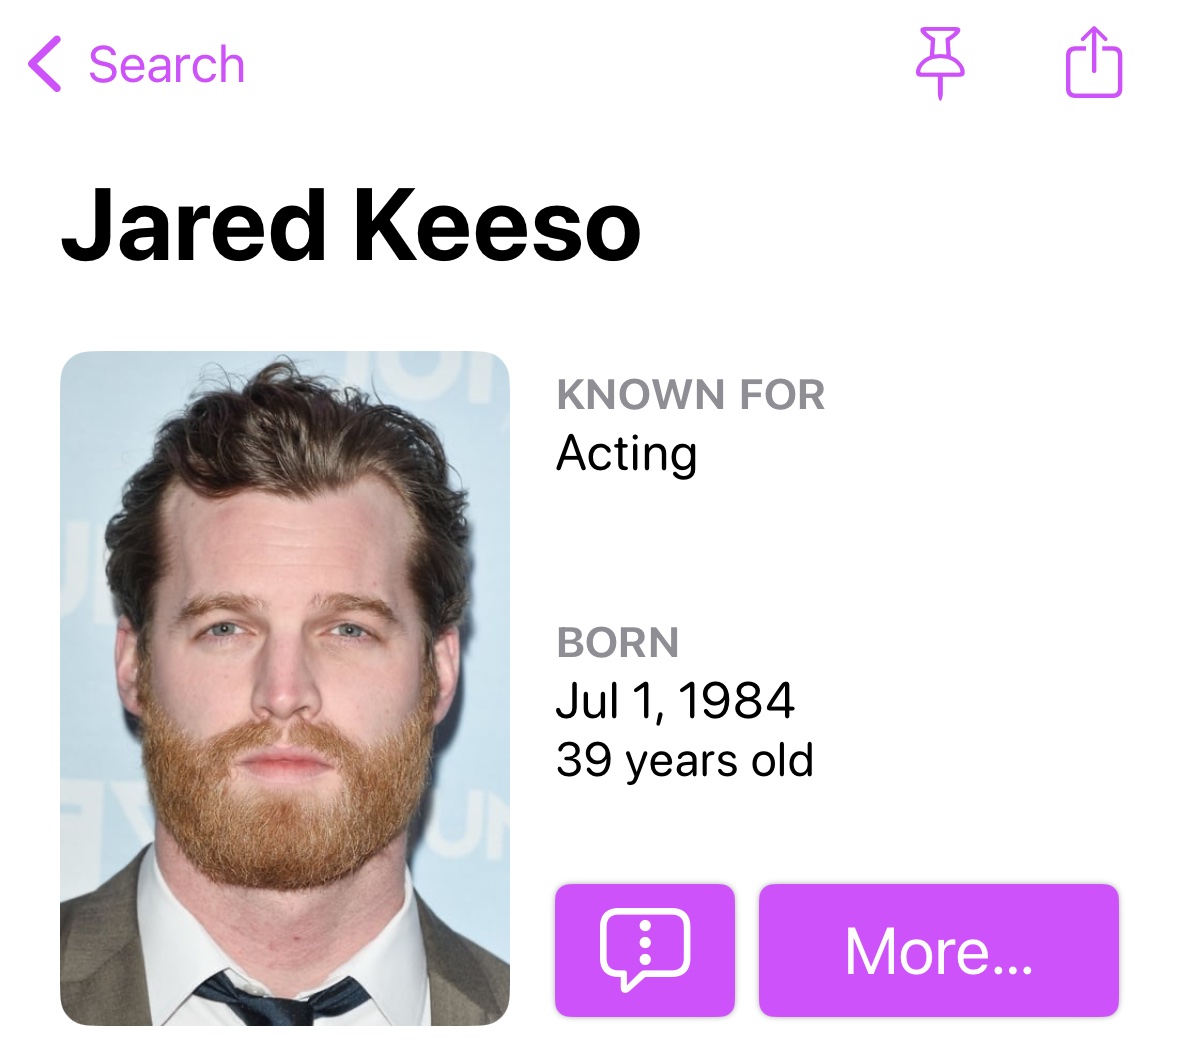 Screenshot showing Jared Keeso, his birthday of 1 July 1984, and his age (at the time of writing), 39 years old.